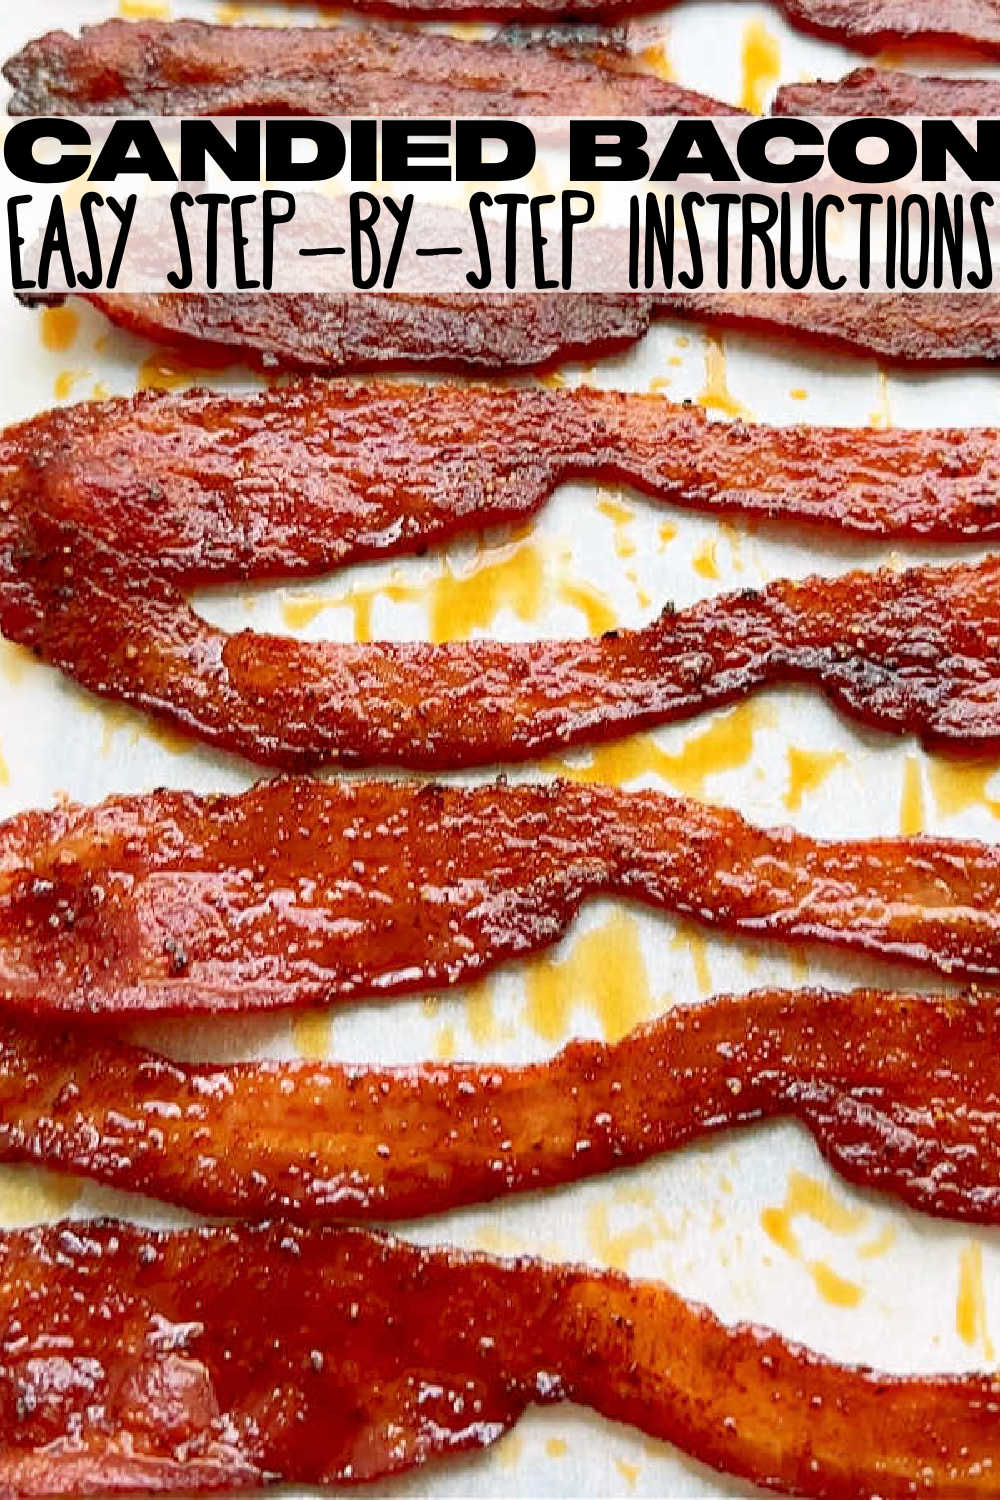 This delicious recipe for candied bacon combines brown sugar and spices with a splash of bourbon to easily brush on the bacon before baking. via @foodtasticmom